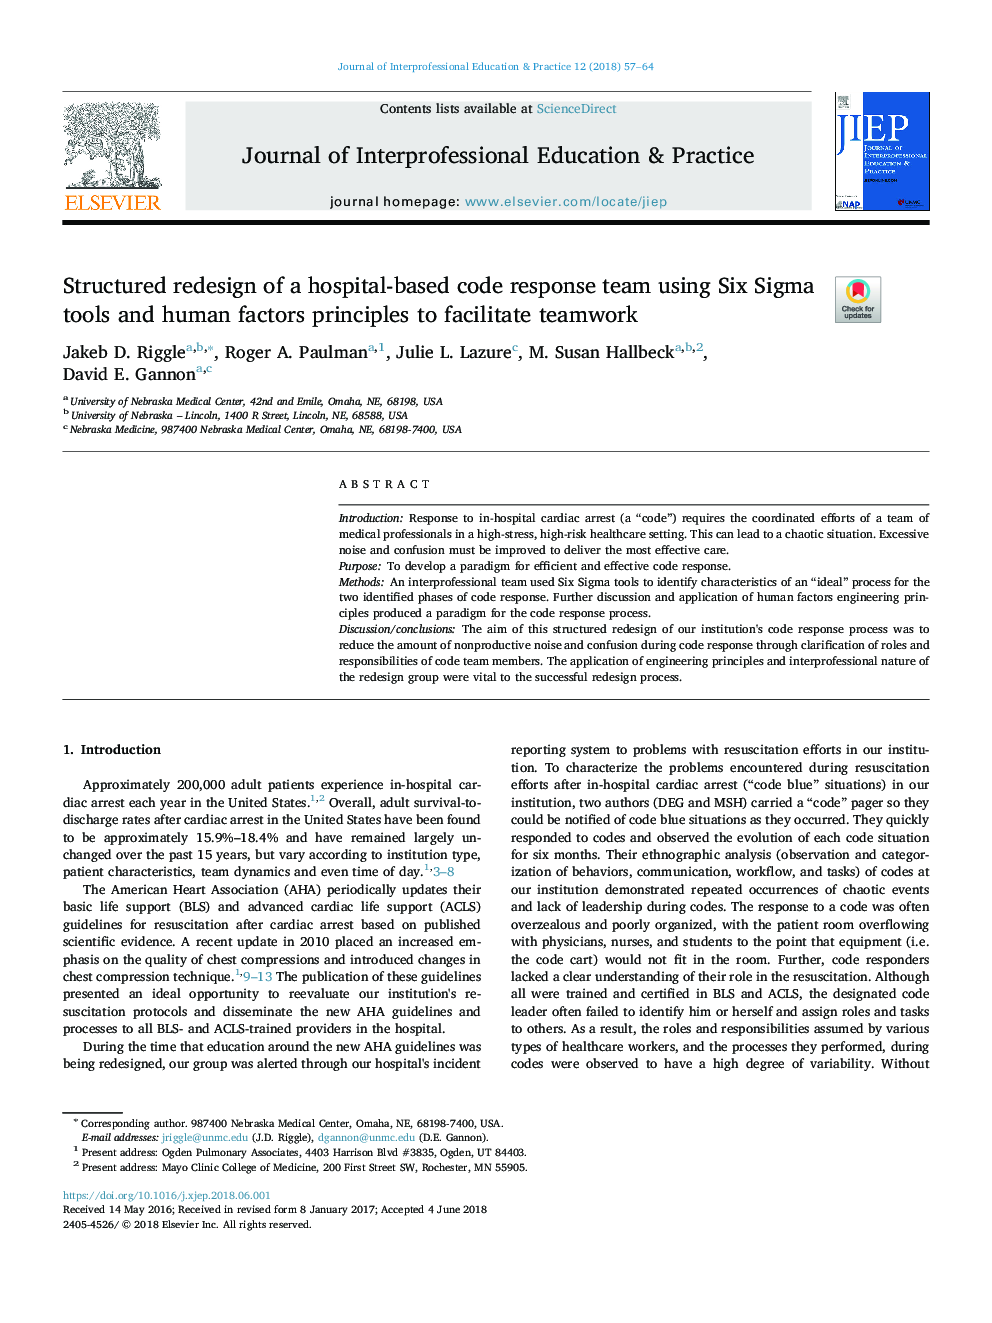 Structured redesign of a hospital-based code response team using Six Sigma tools and human factors principles to facilitate teamwork